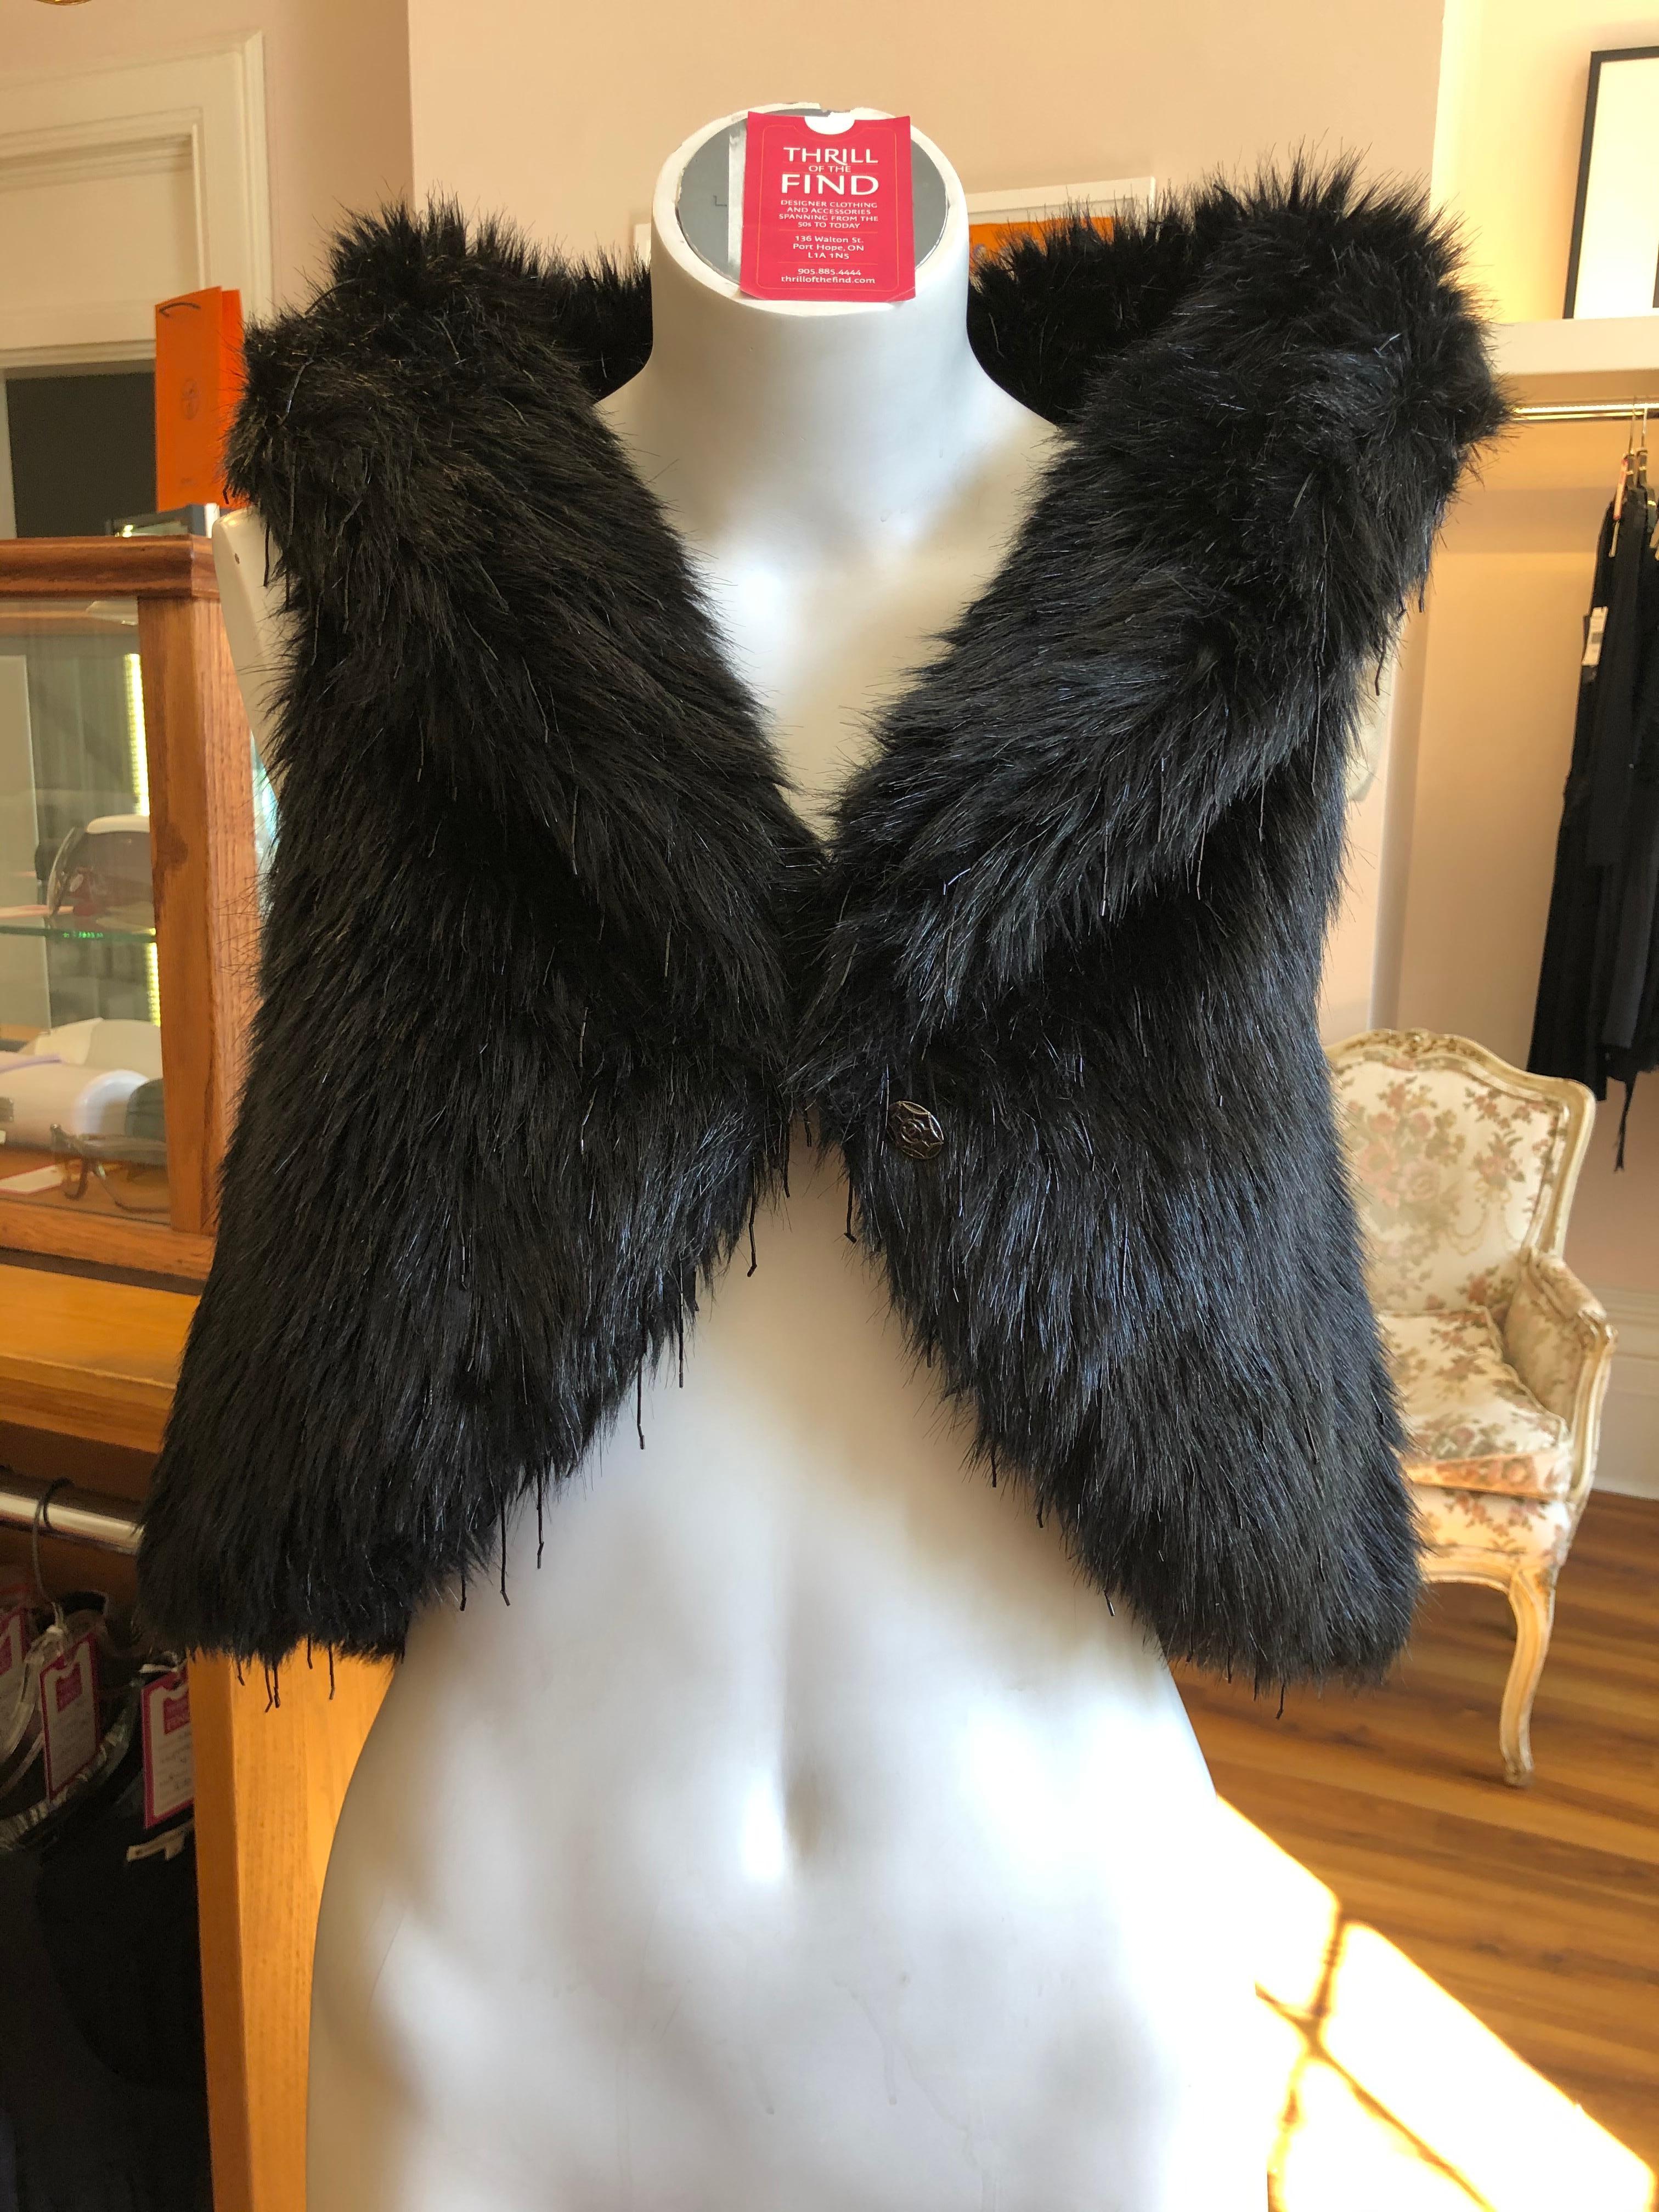 Never worn and with part of the tag still intact, as per picture, this Chanel black faux fur has a collar which can be put up or down; a CC logo button, and hook and eye closure.  There is also lovely beading throughout.

This Chanel piece was